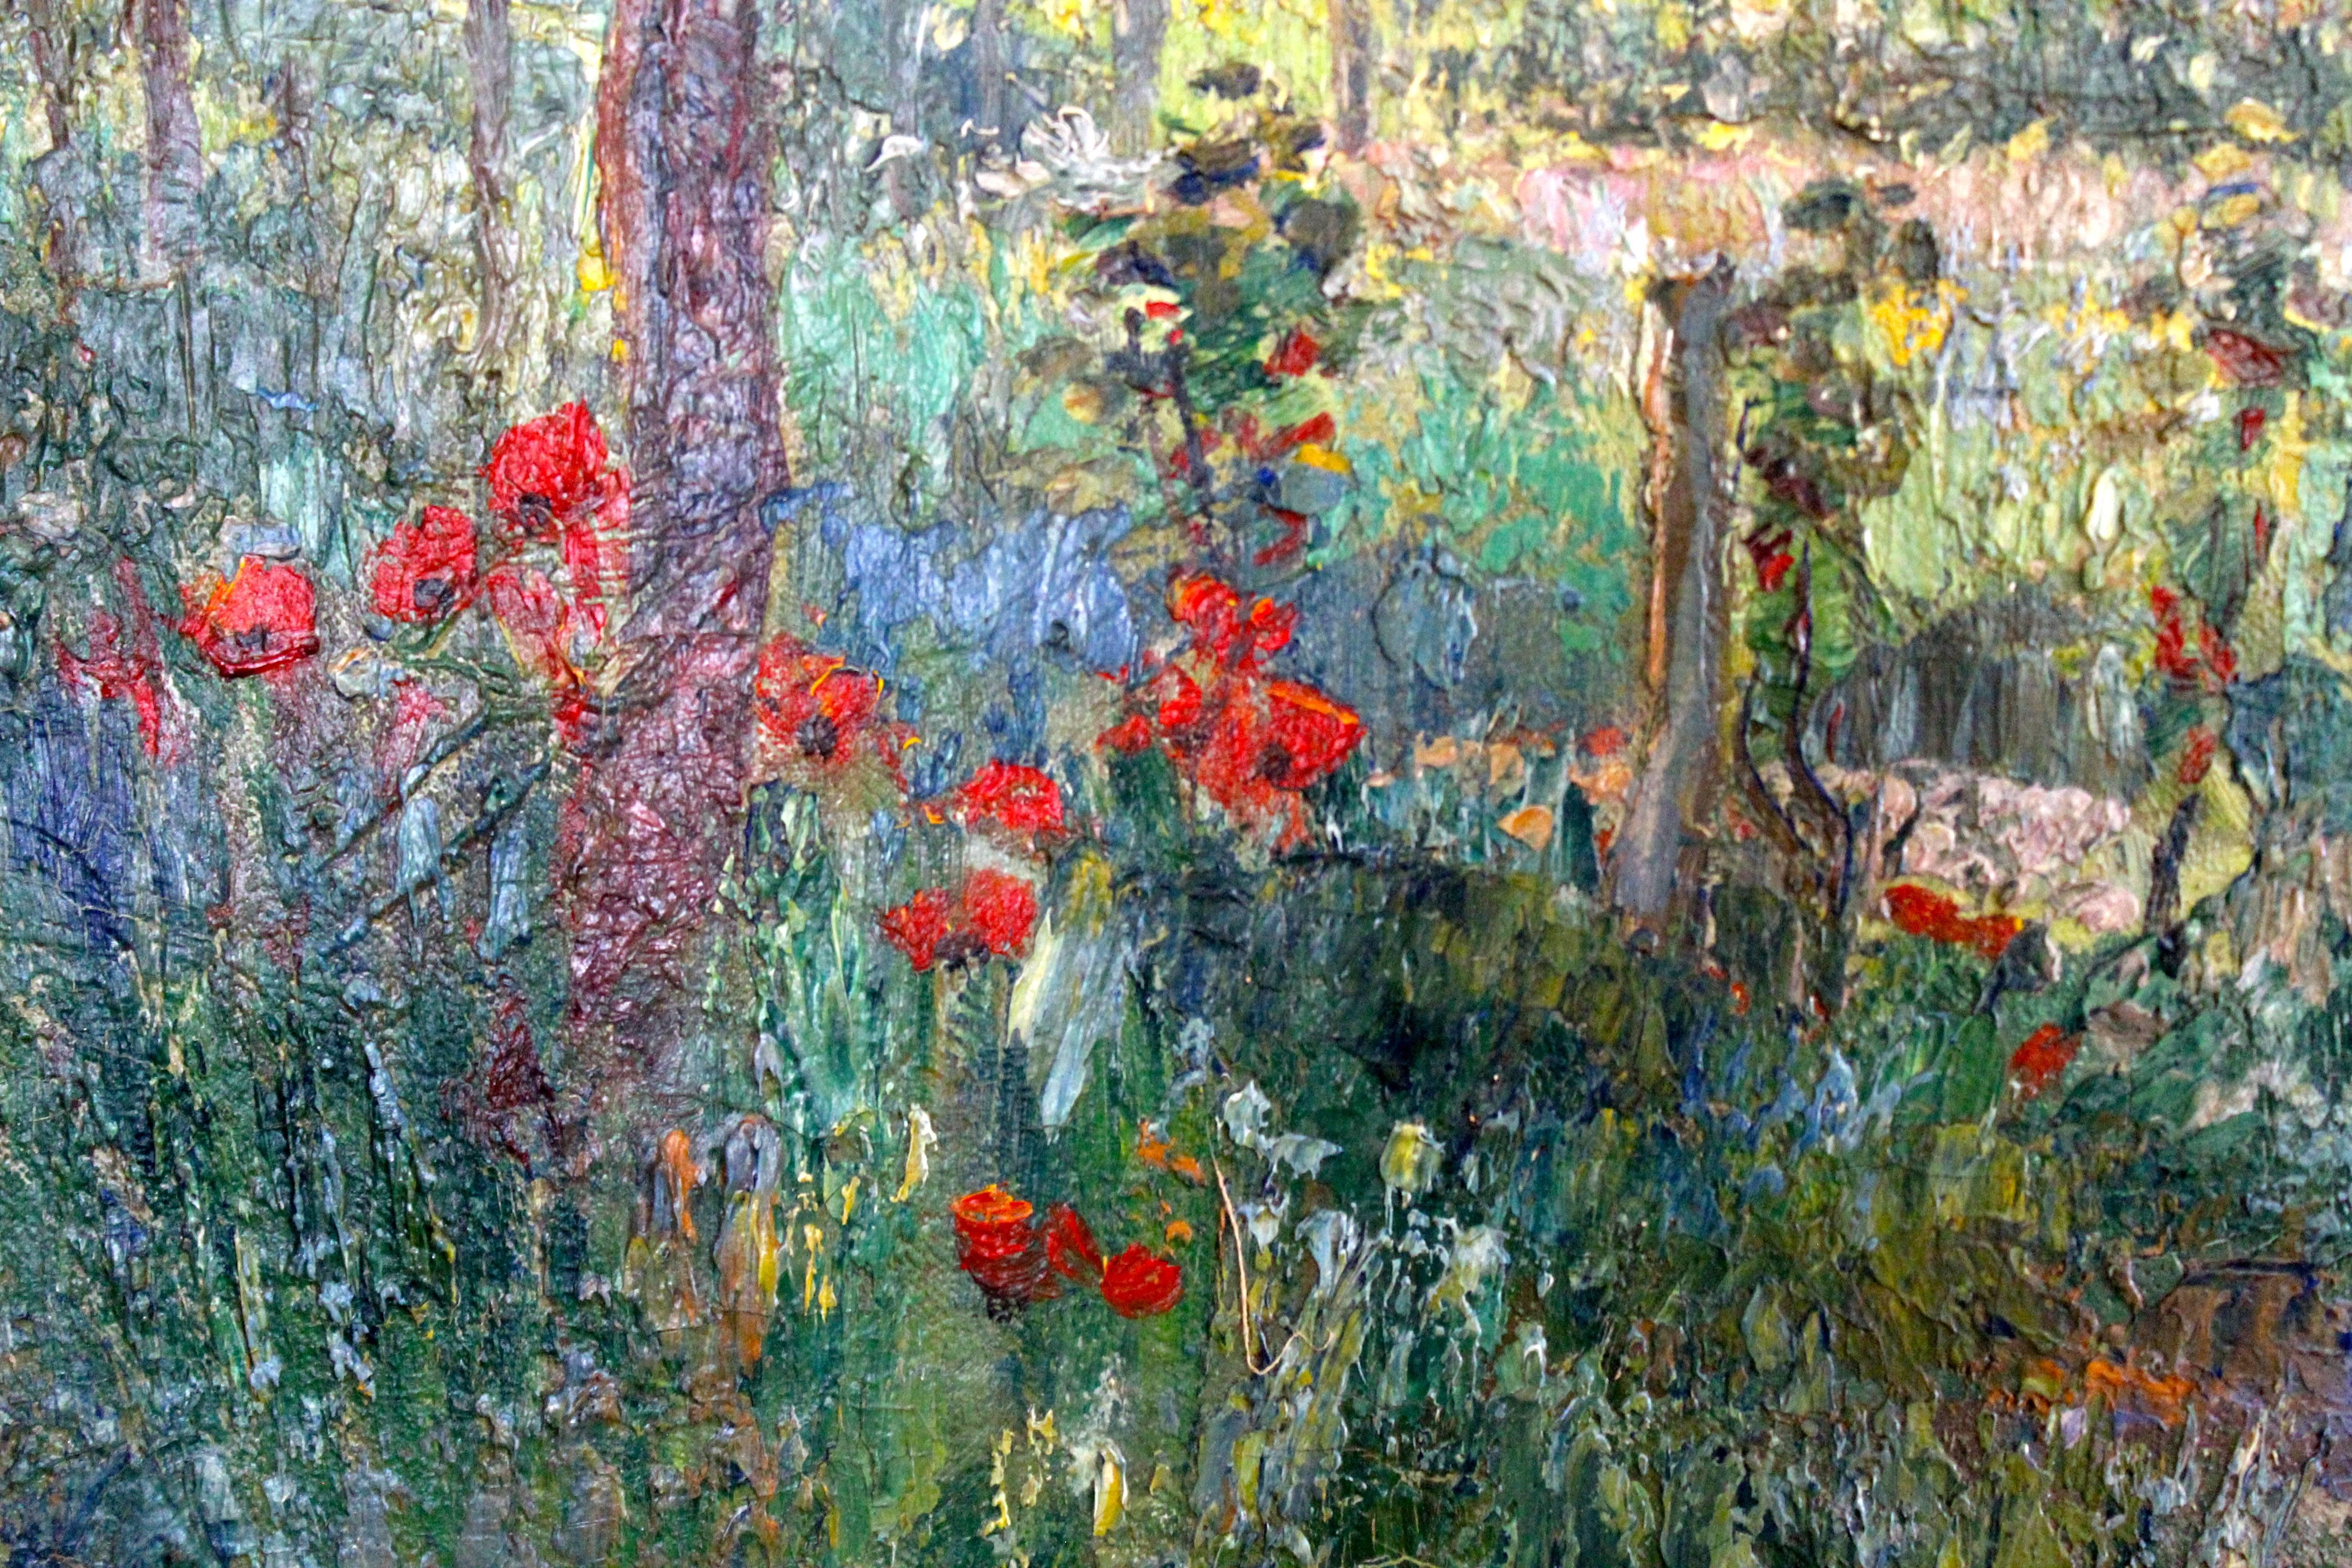 Painted Impressionist Oil Painting, C. Cundall, 1926